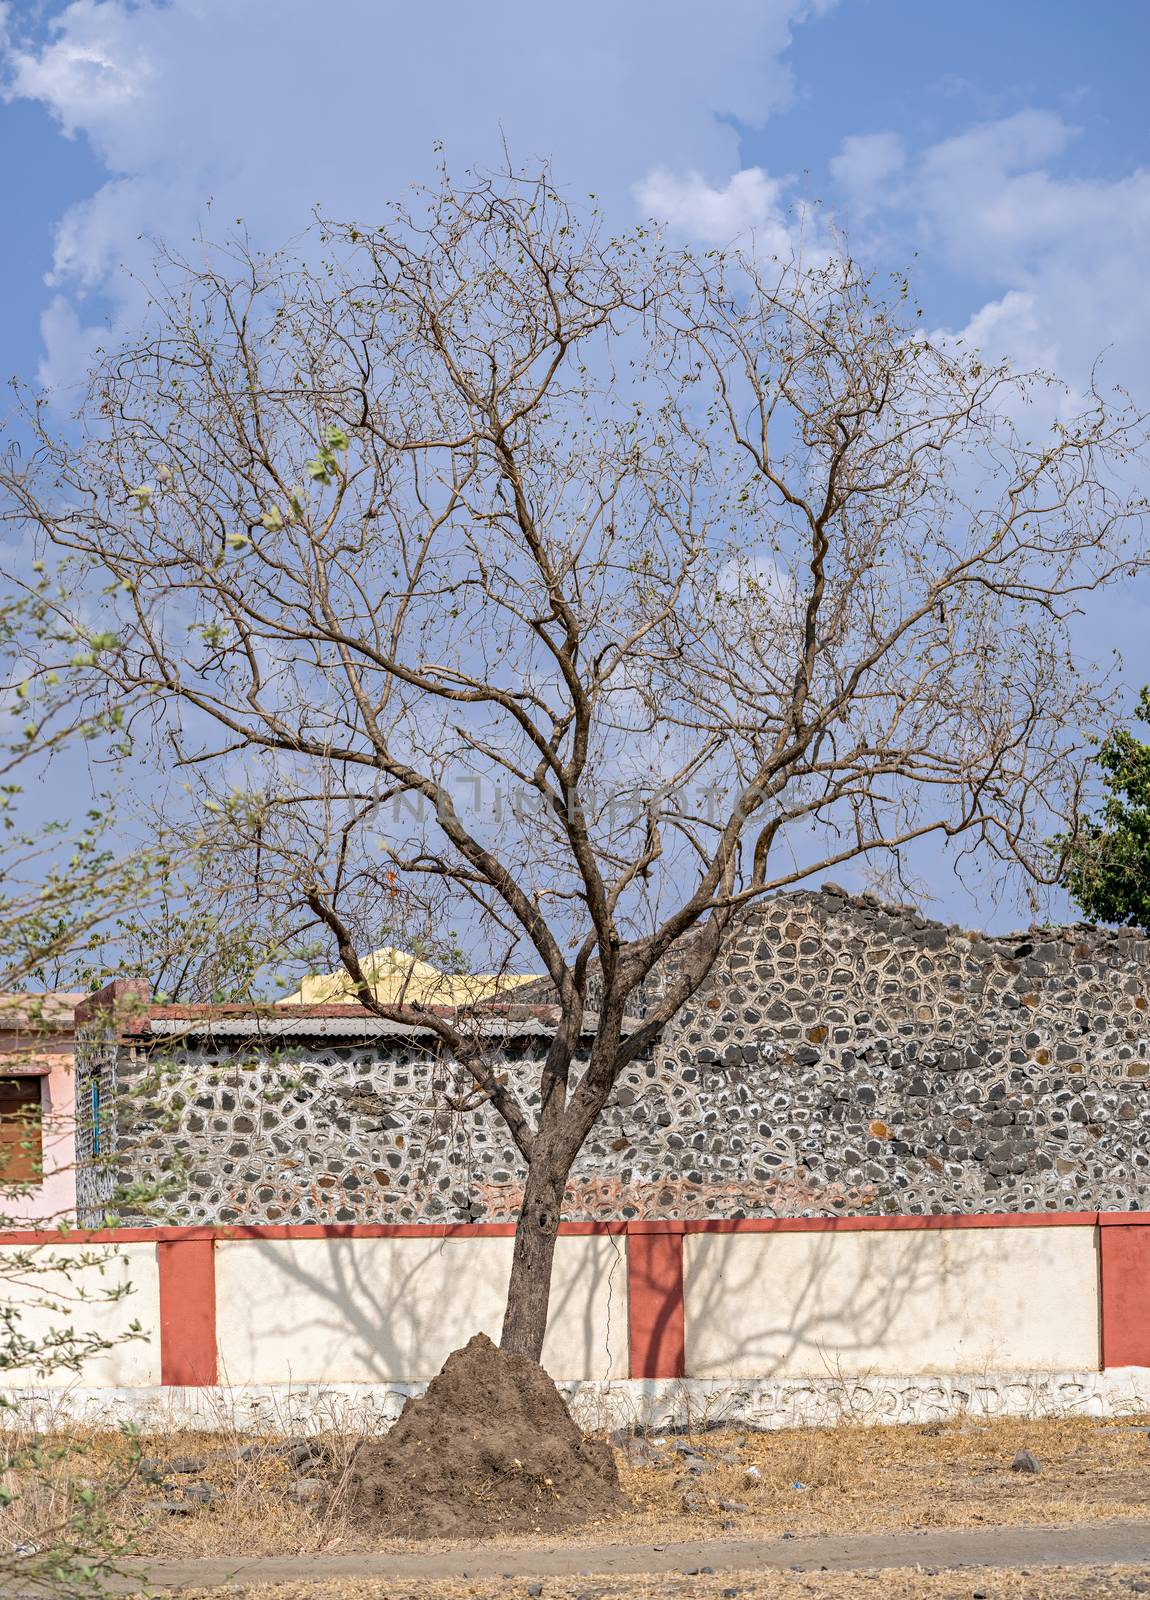 A dry tree and house of ants in village in Pune, Maharashtra, India during summer. by lalam